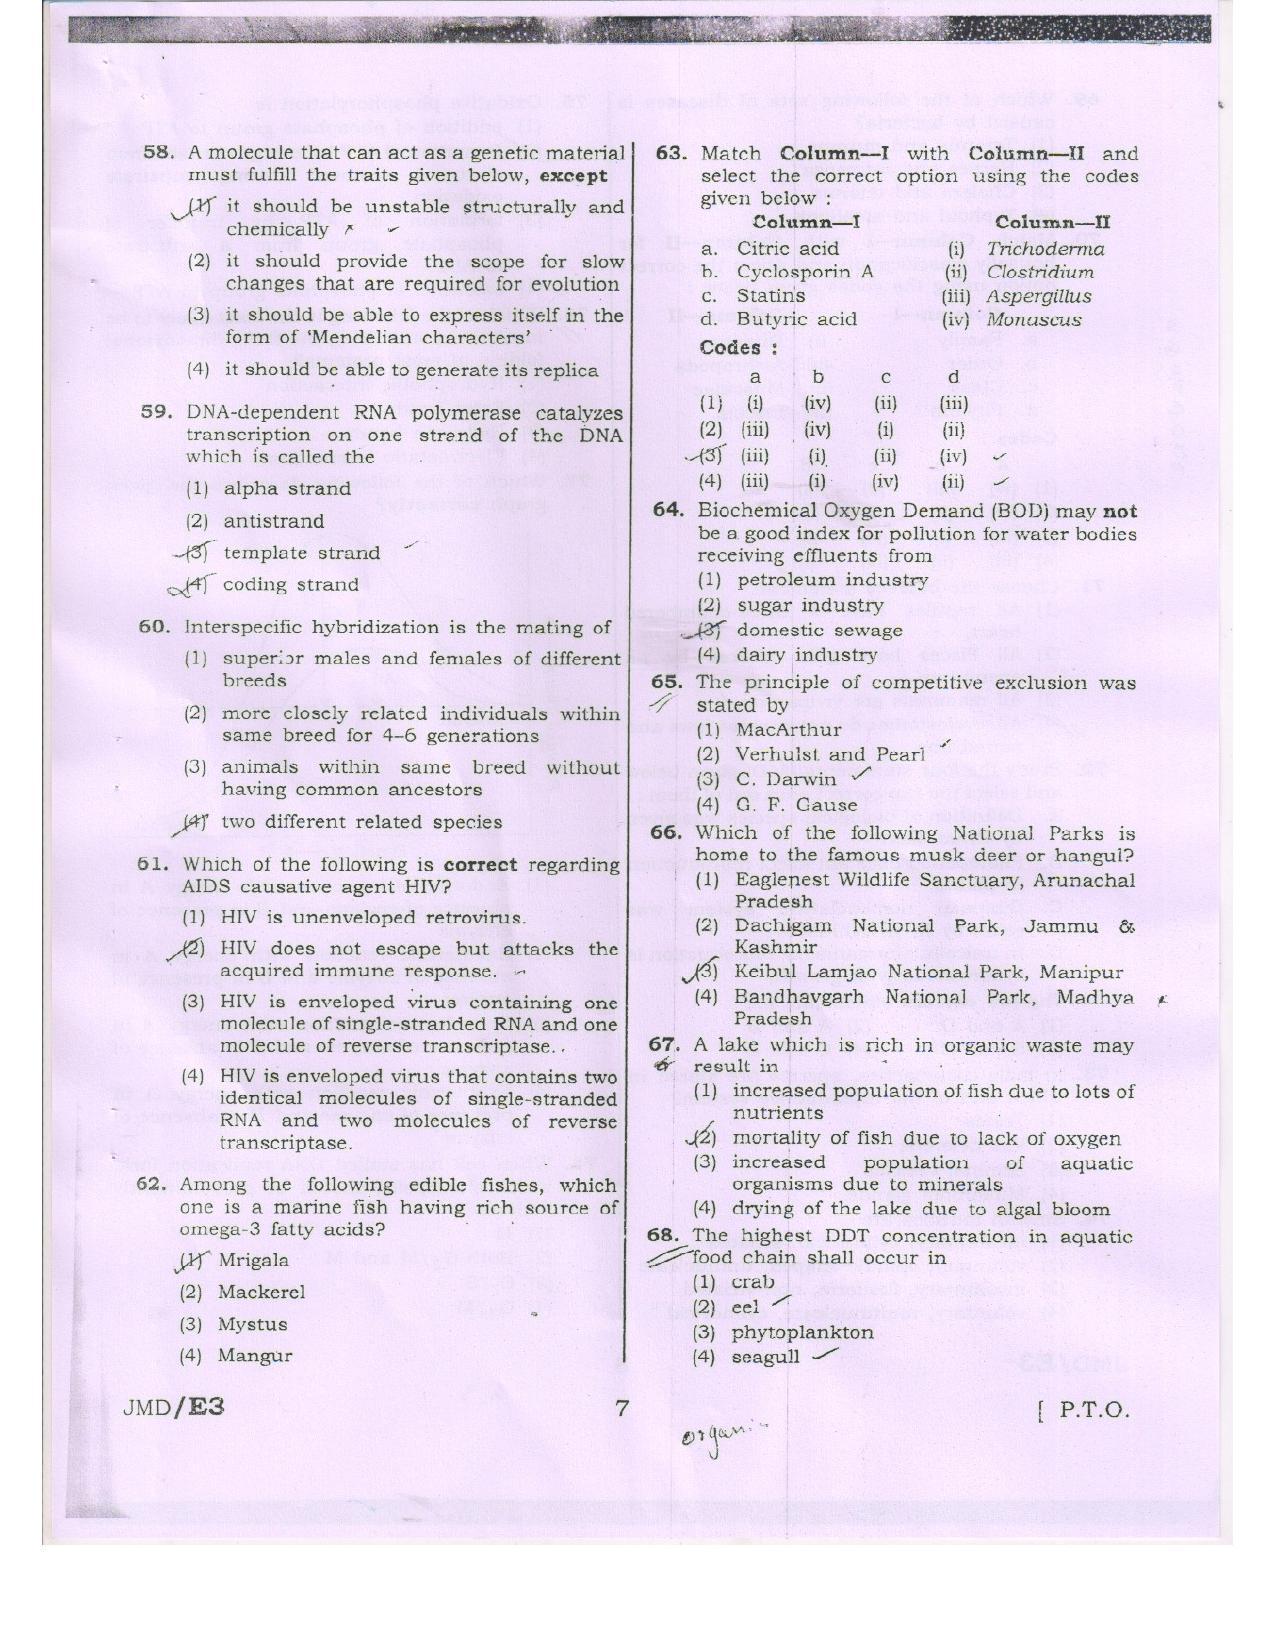 NEET Code RR 2016 Question Paper - Page 7